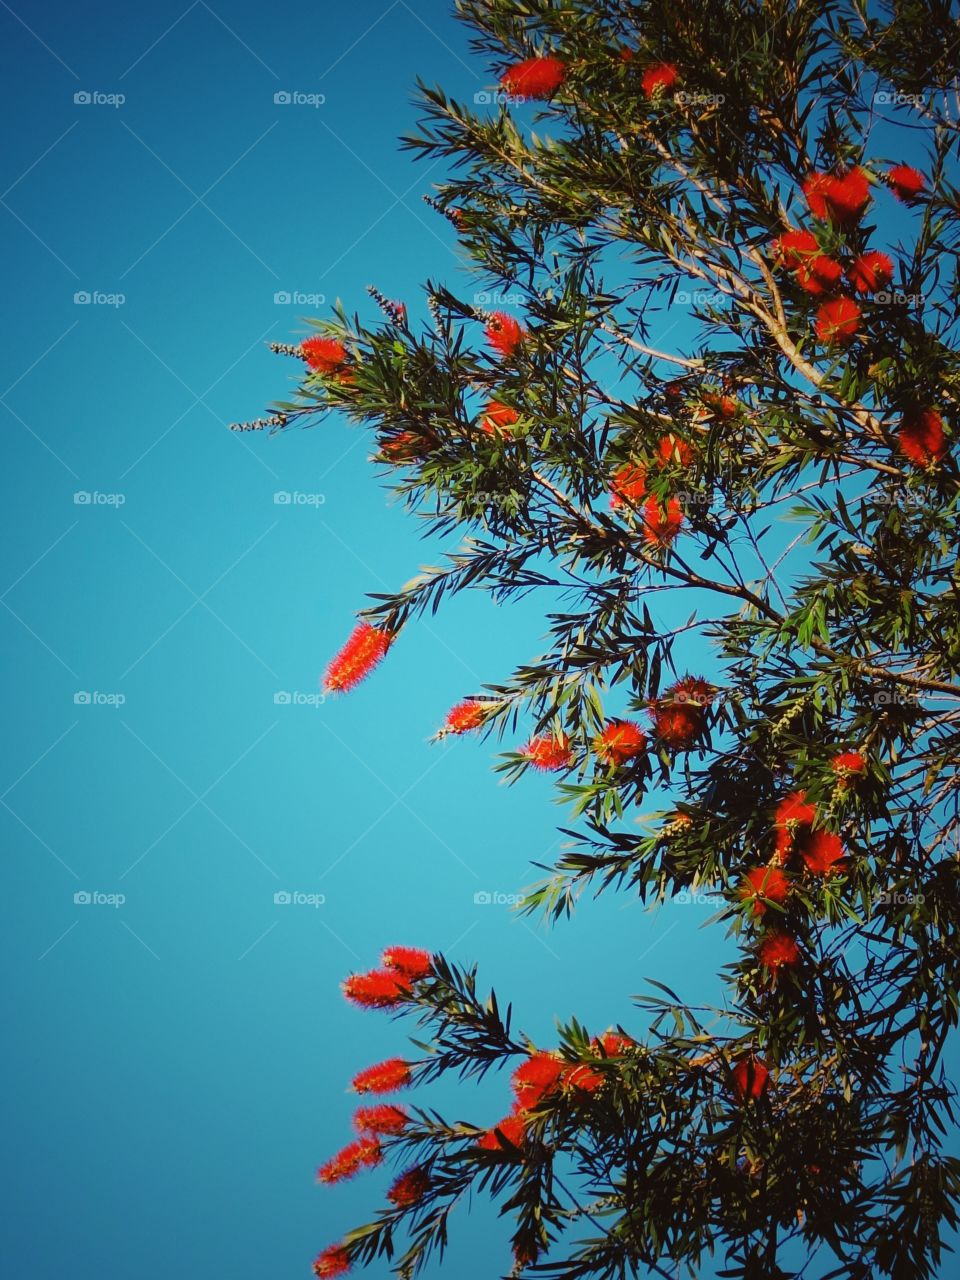 Red Flowers Against A Light Blue Sky